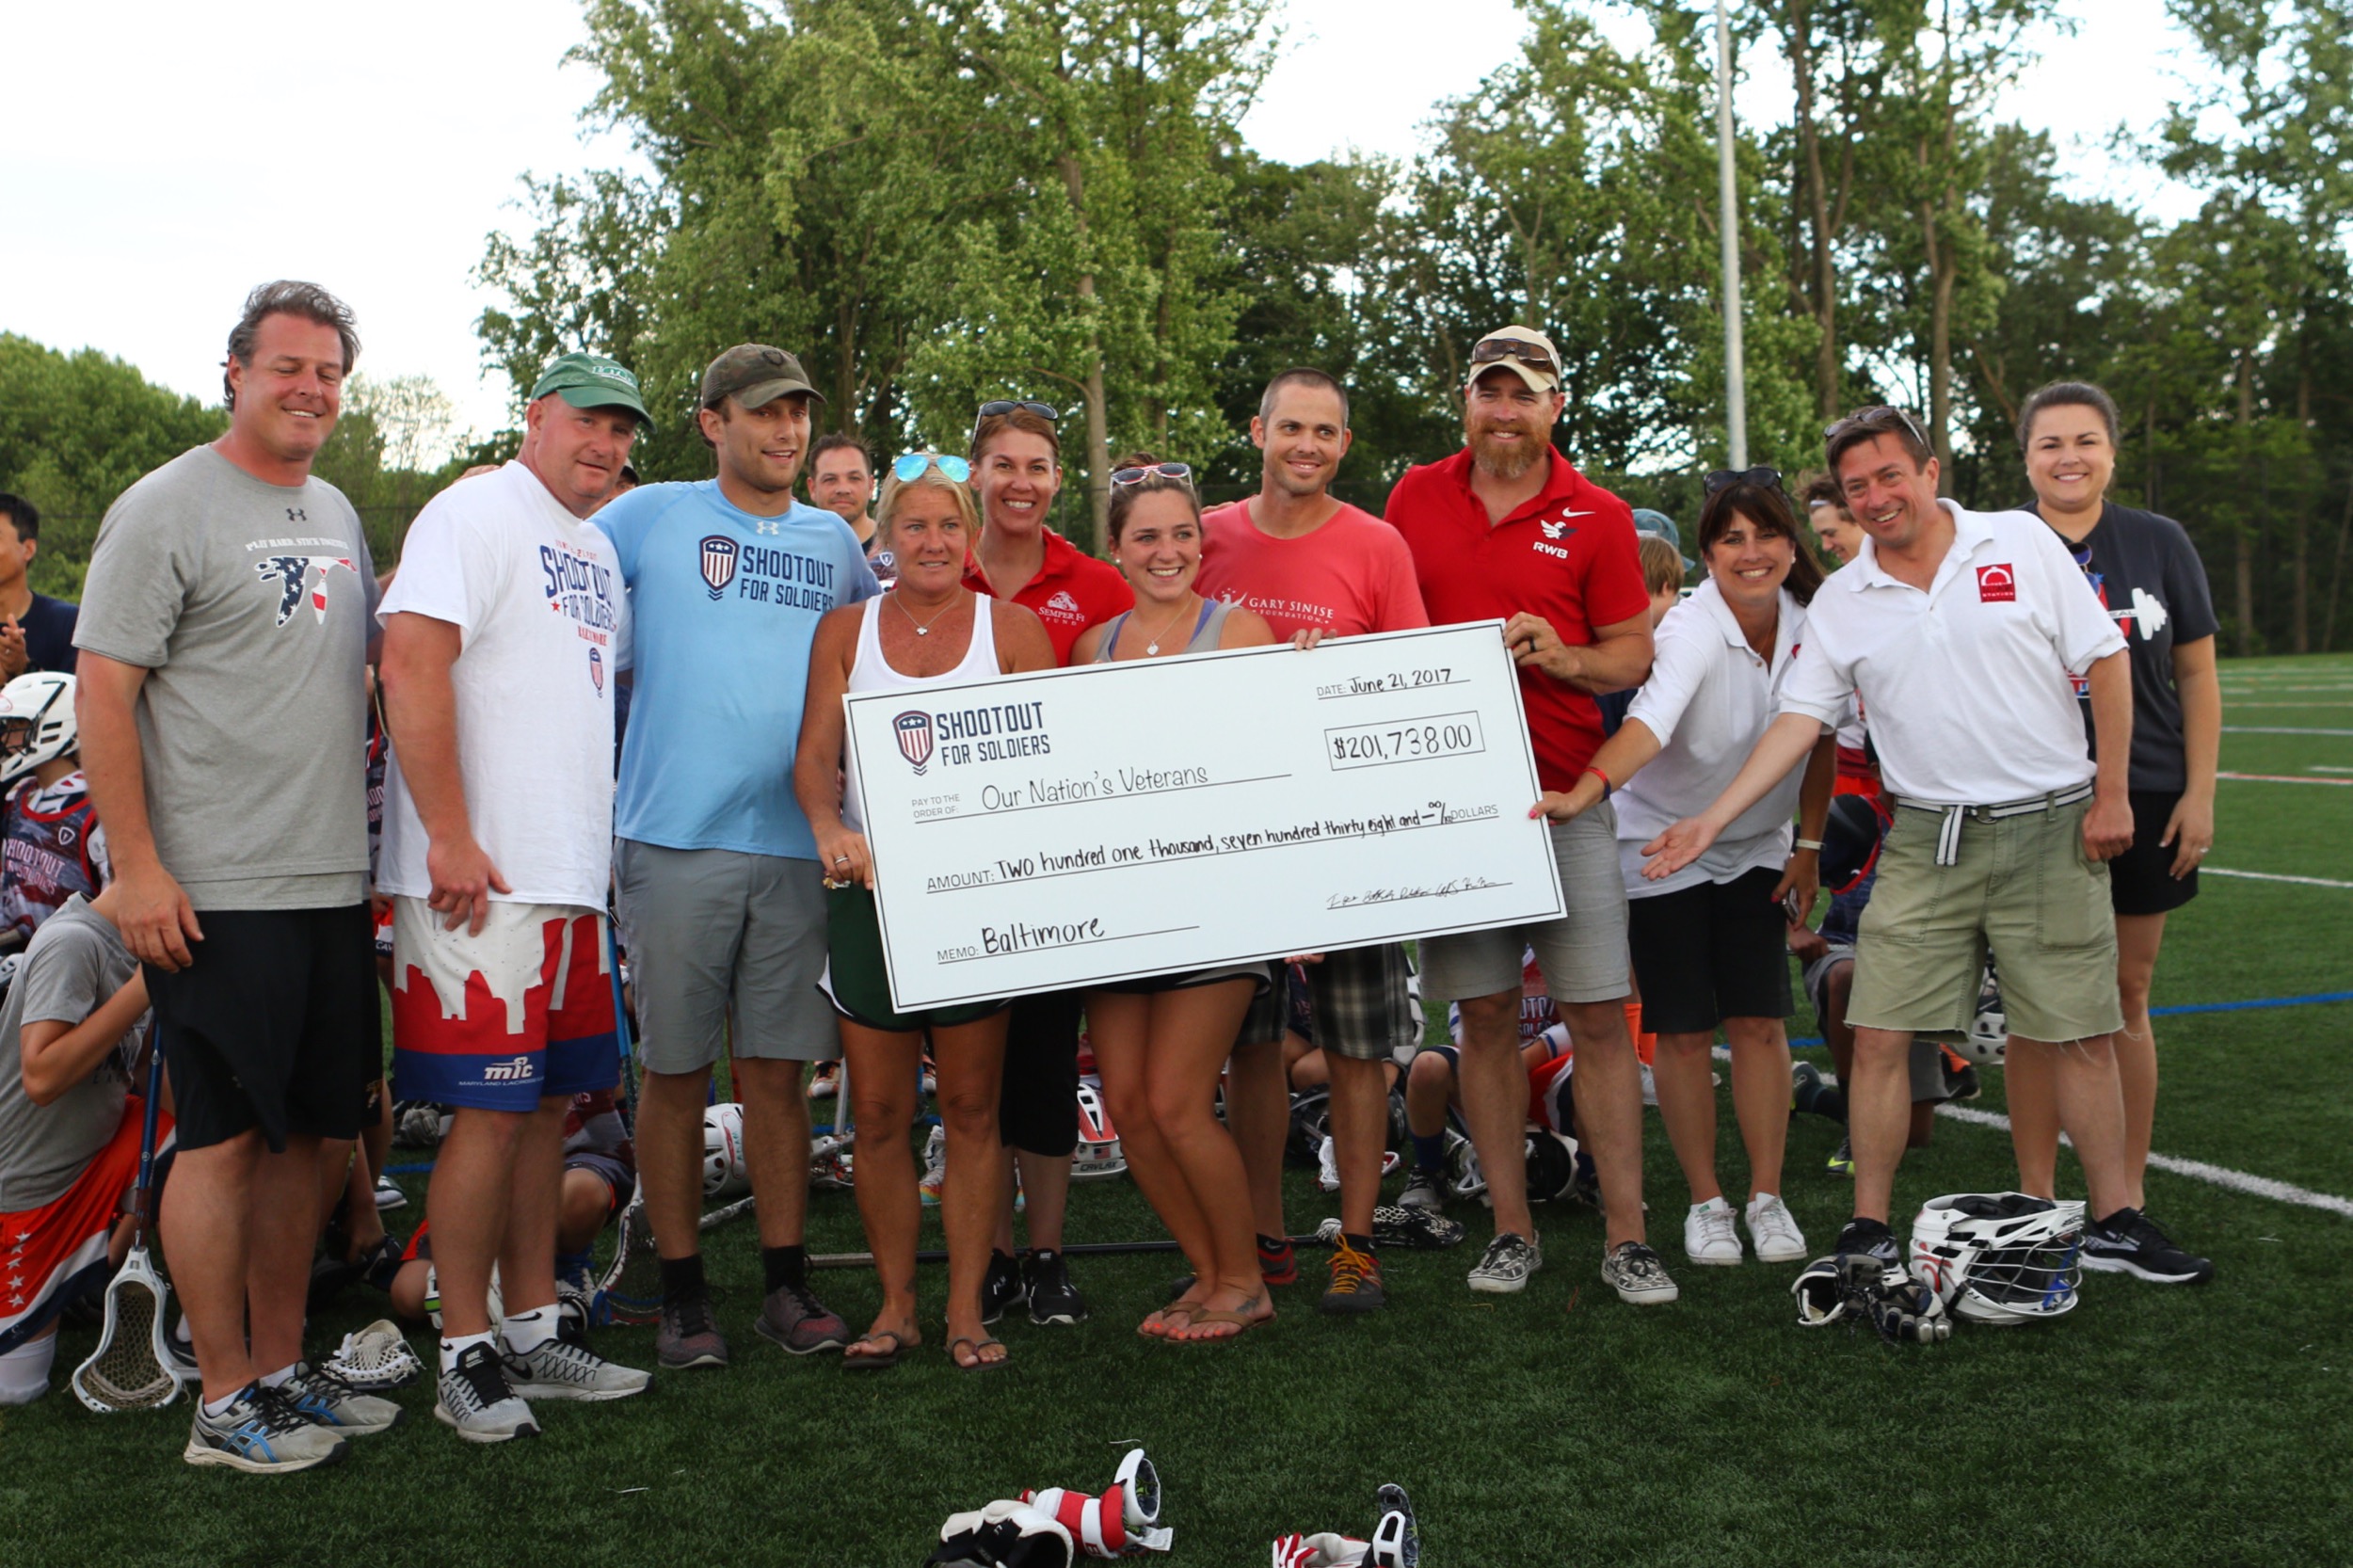 Shootout for Soldiers Baltimore Shatters Event Record, Raises $201,000+ for Vet Charities!